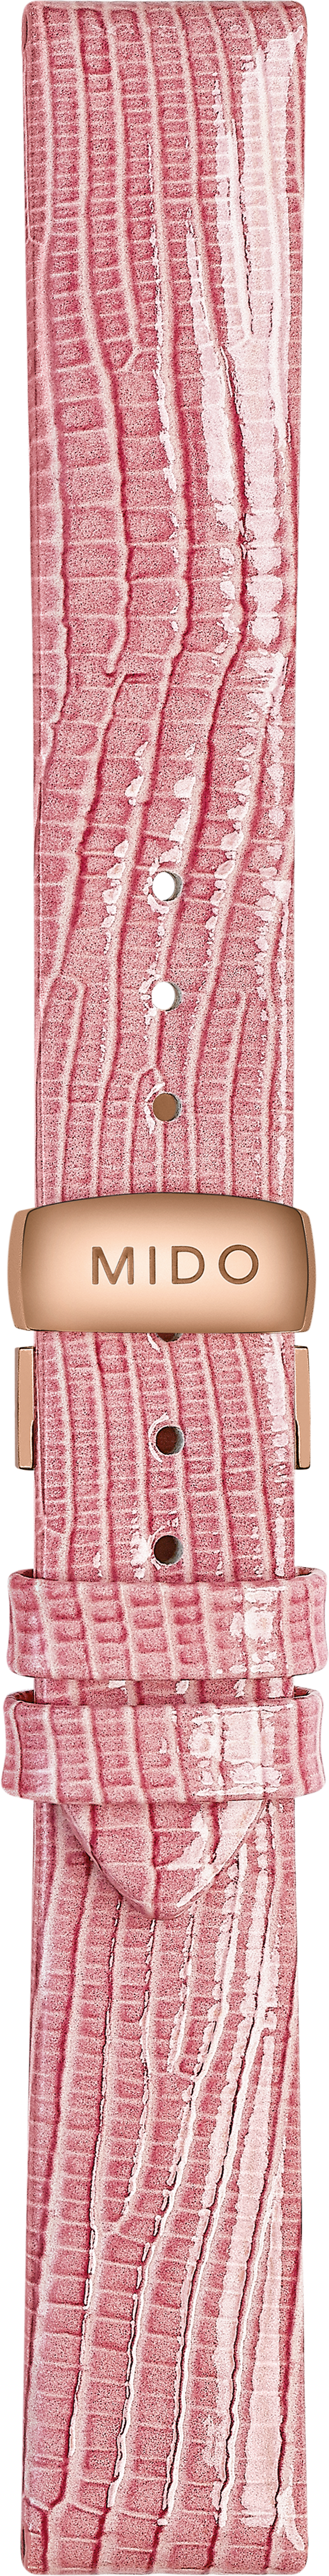 Mido Rainflower pink cowhide leather strap